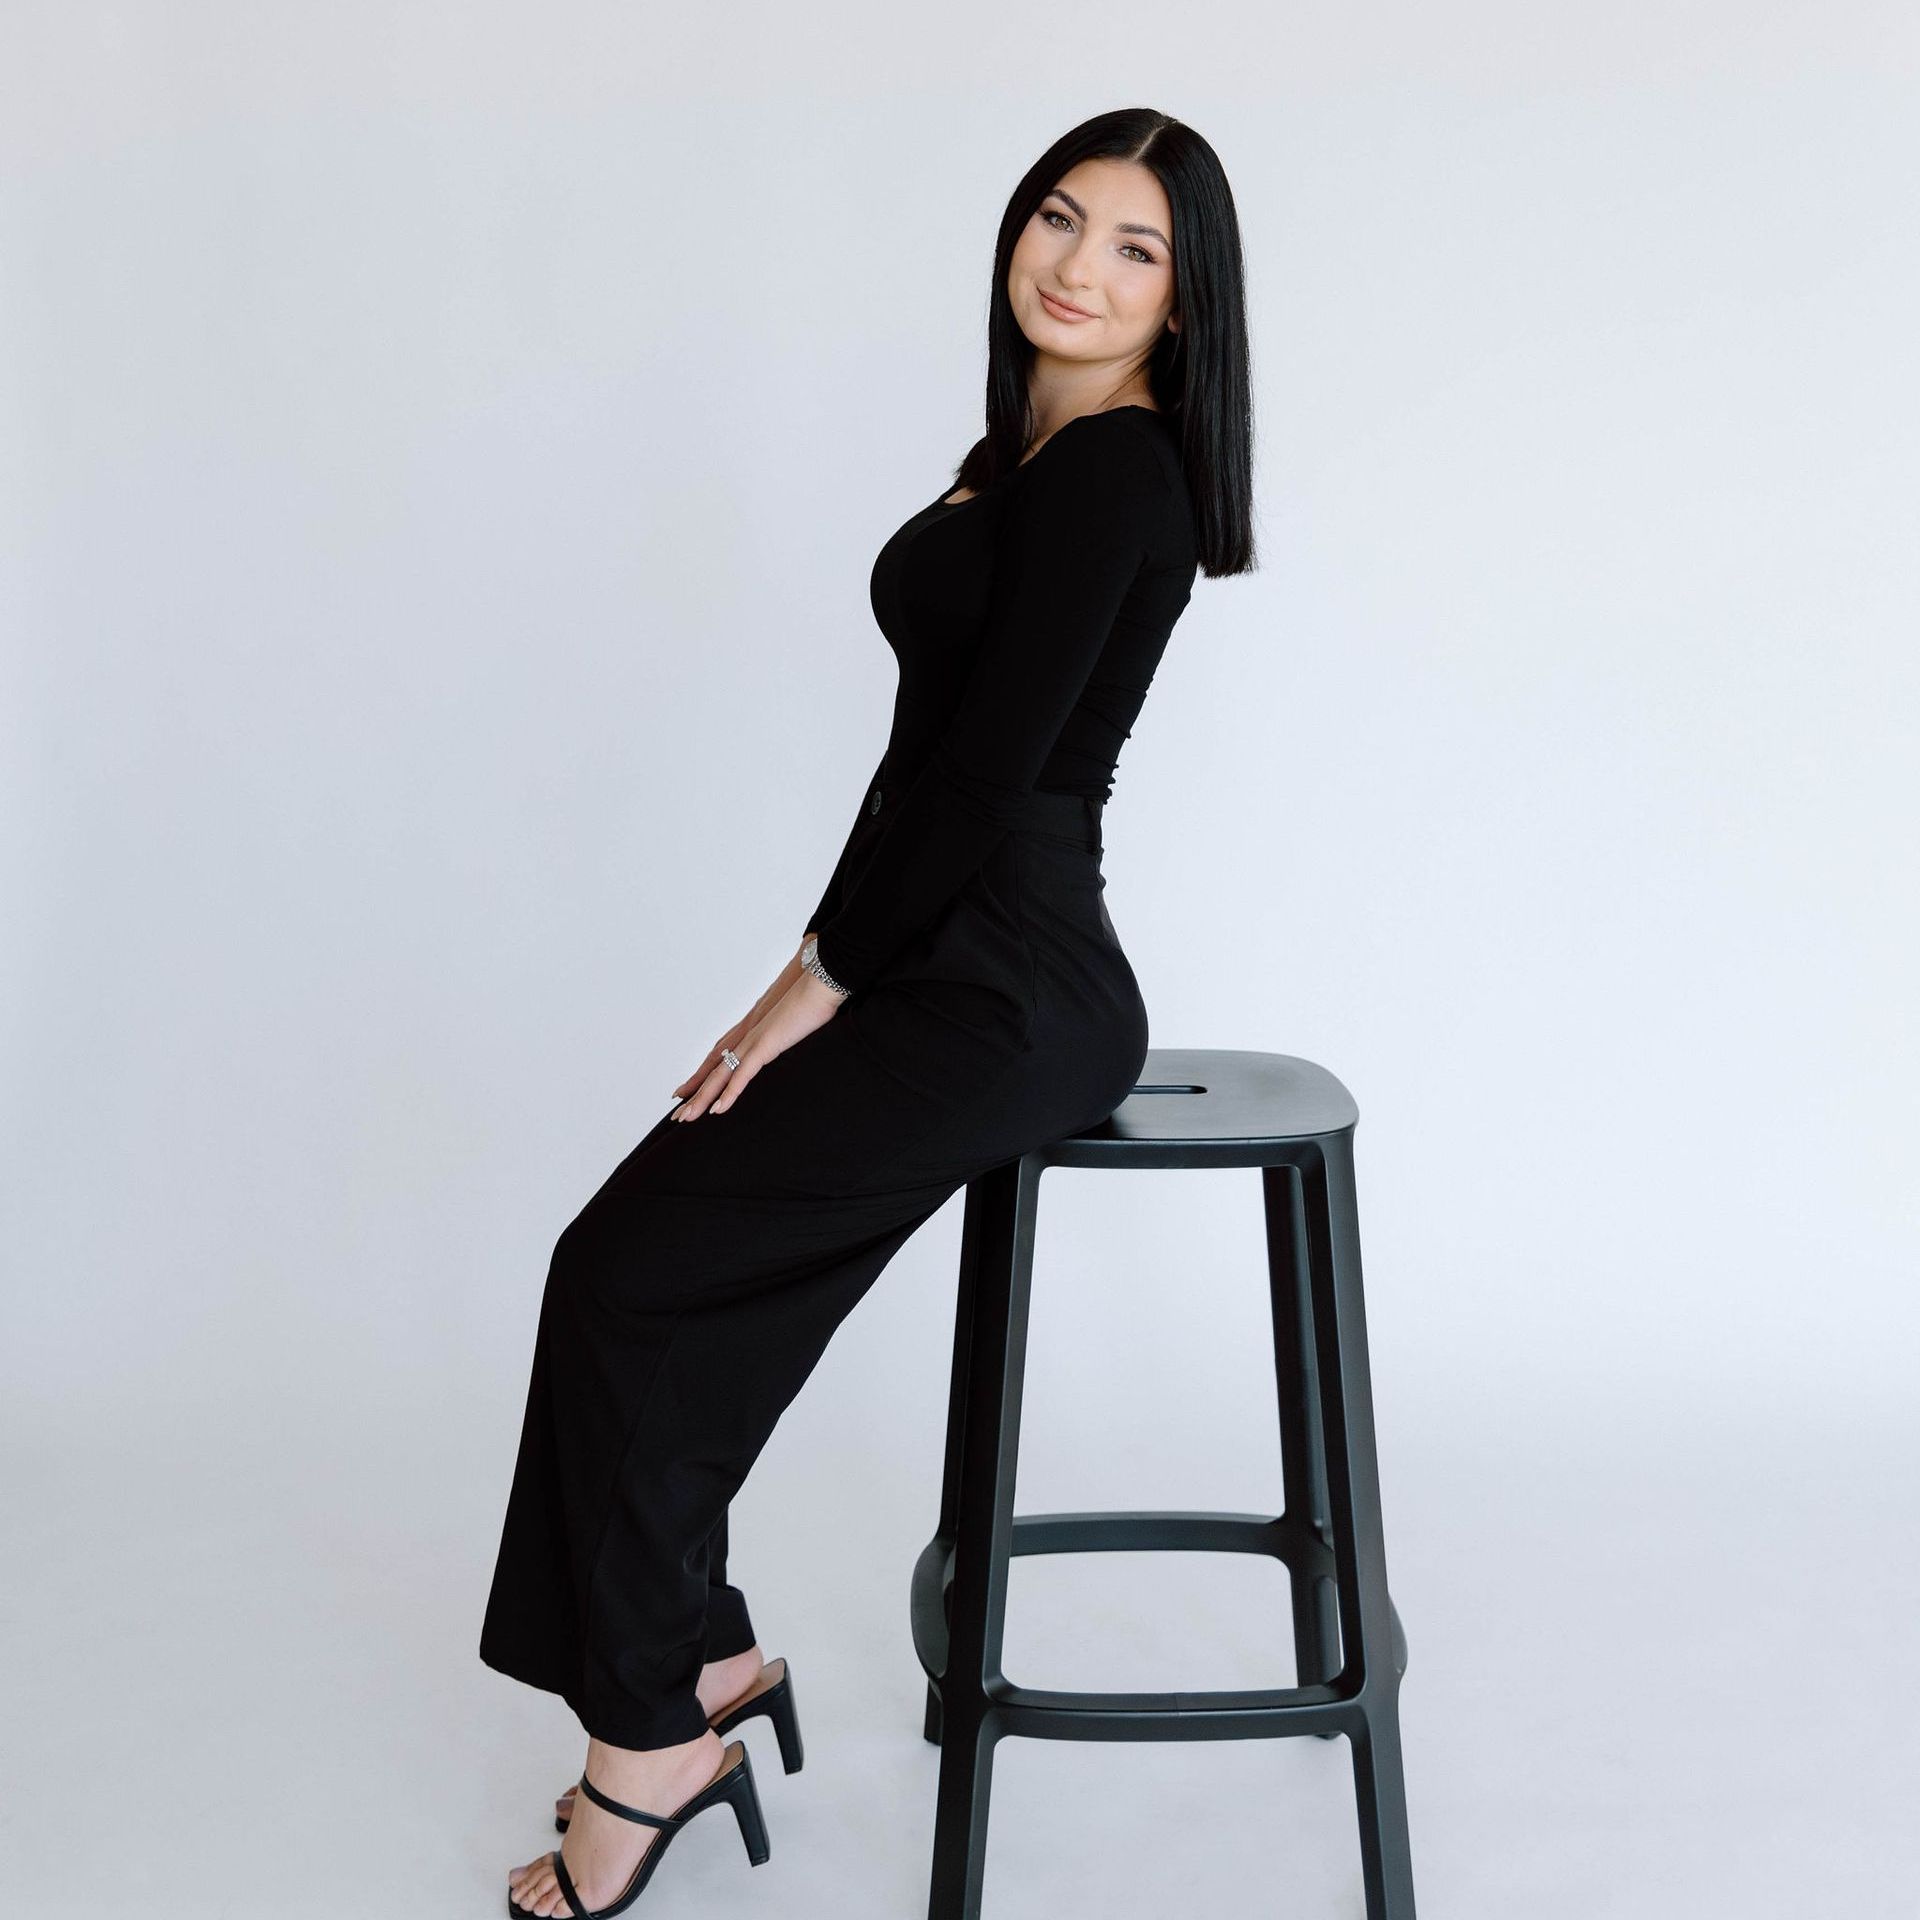 A woman in a black dress is sitting on a stool.